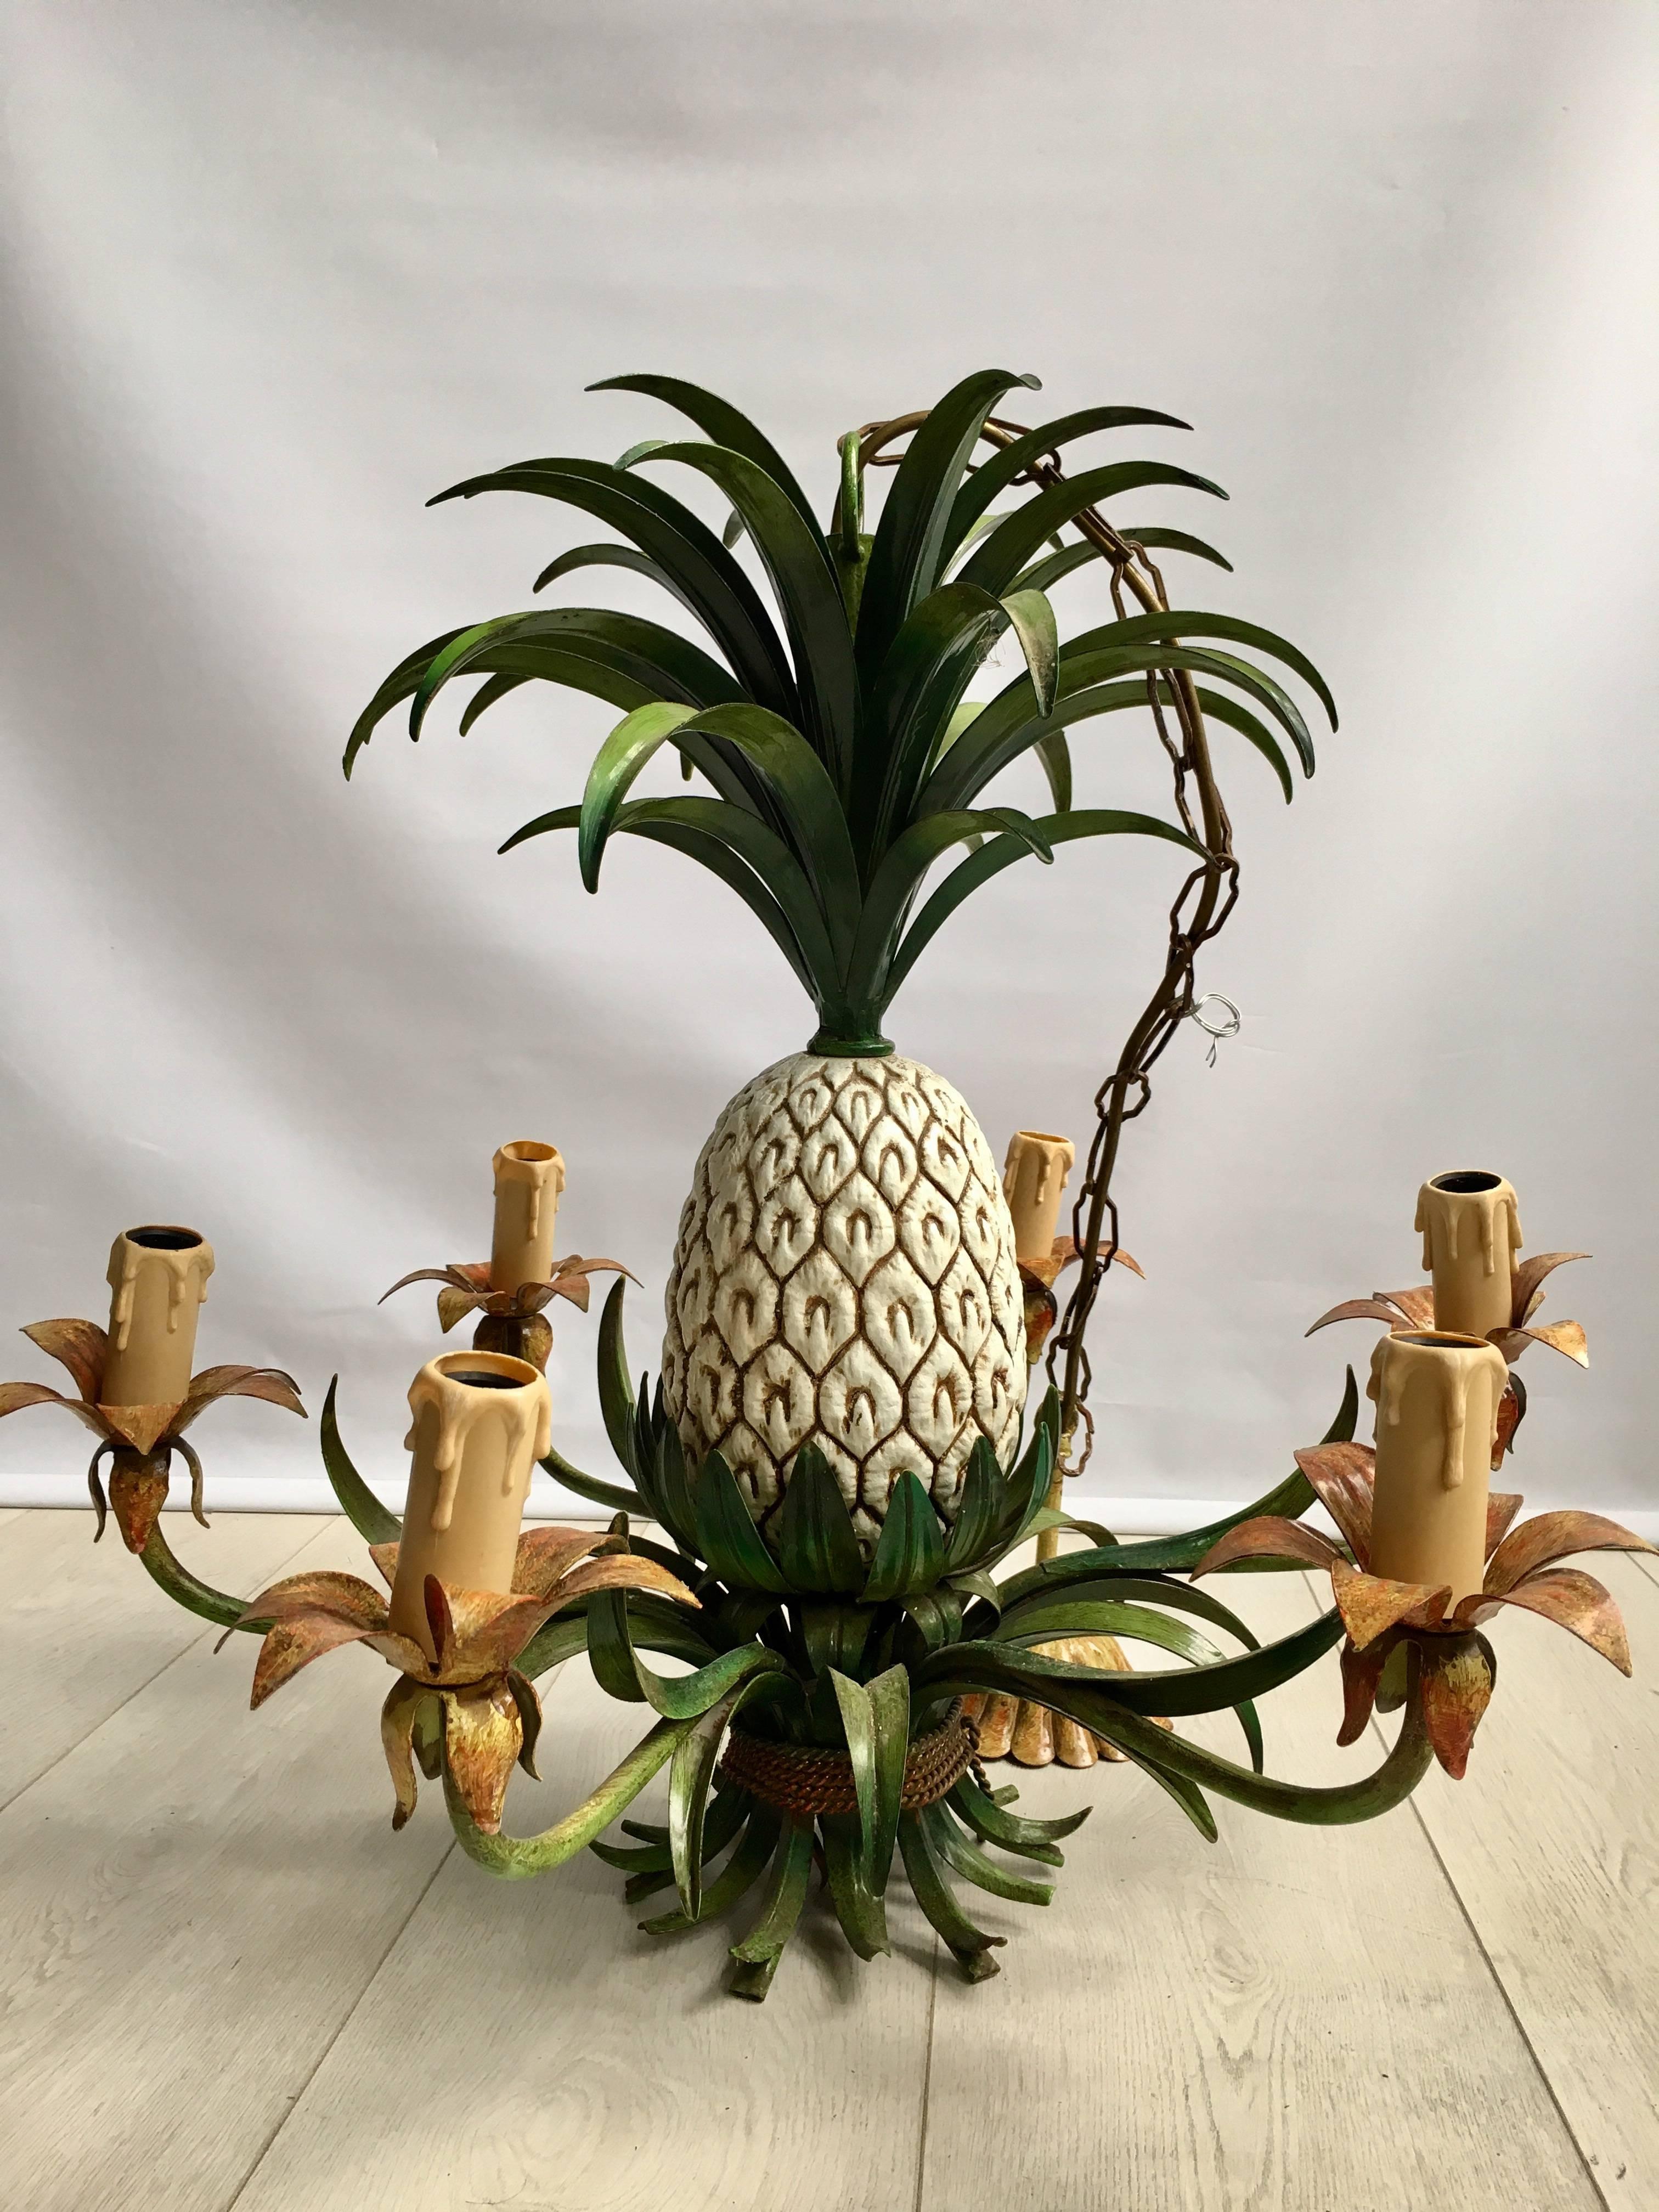 Quite unique pineapple chandelier from France, circa 1960

Lovely vibrant green color to the painted tole leaves, a large pineapple sits at the centre of the chandelier with six arms.

Measuring: 54cm tall (with additional 50cm of chain) and